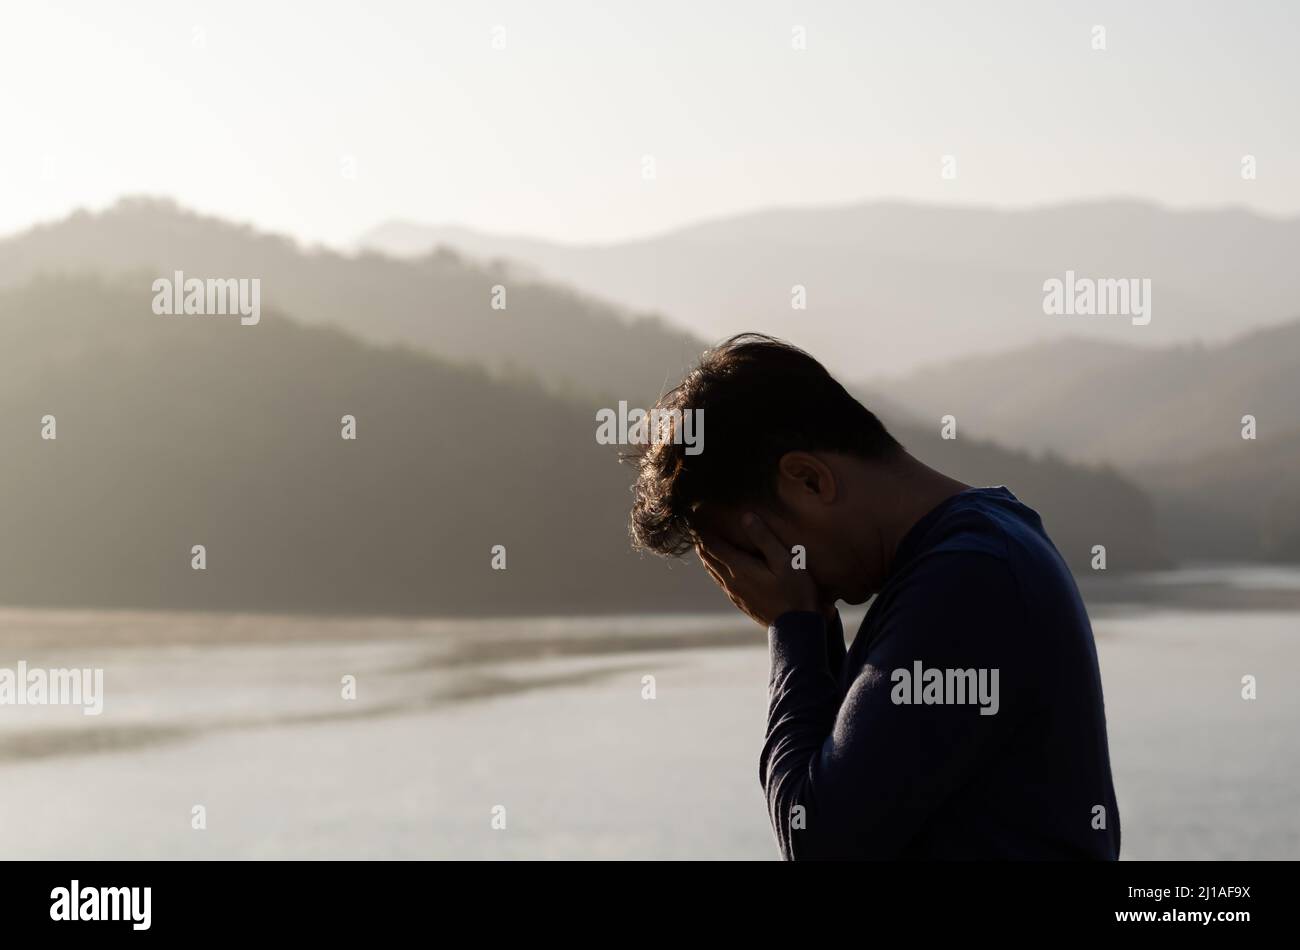 Asian miserable depressed man stand alone with mountain and lake background. Depression and mental health concept. Stock Photo